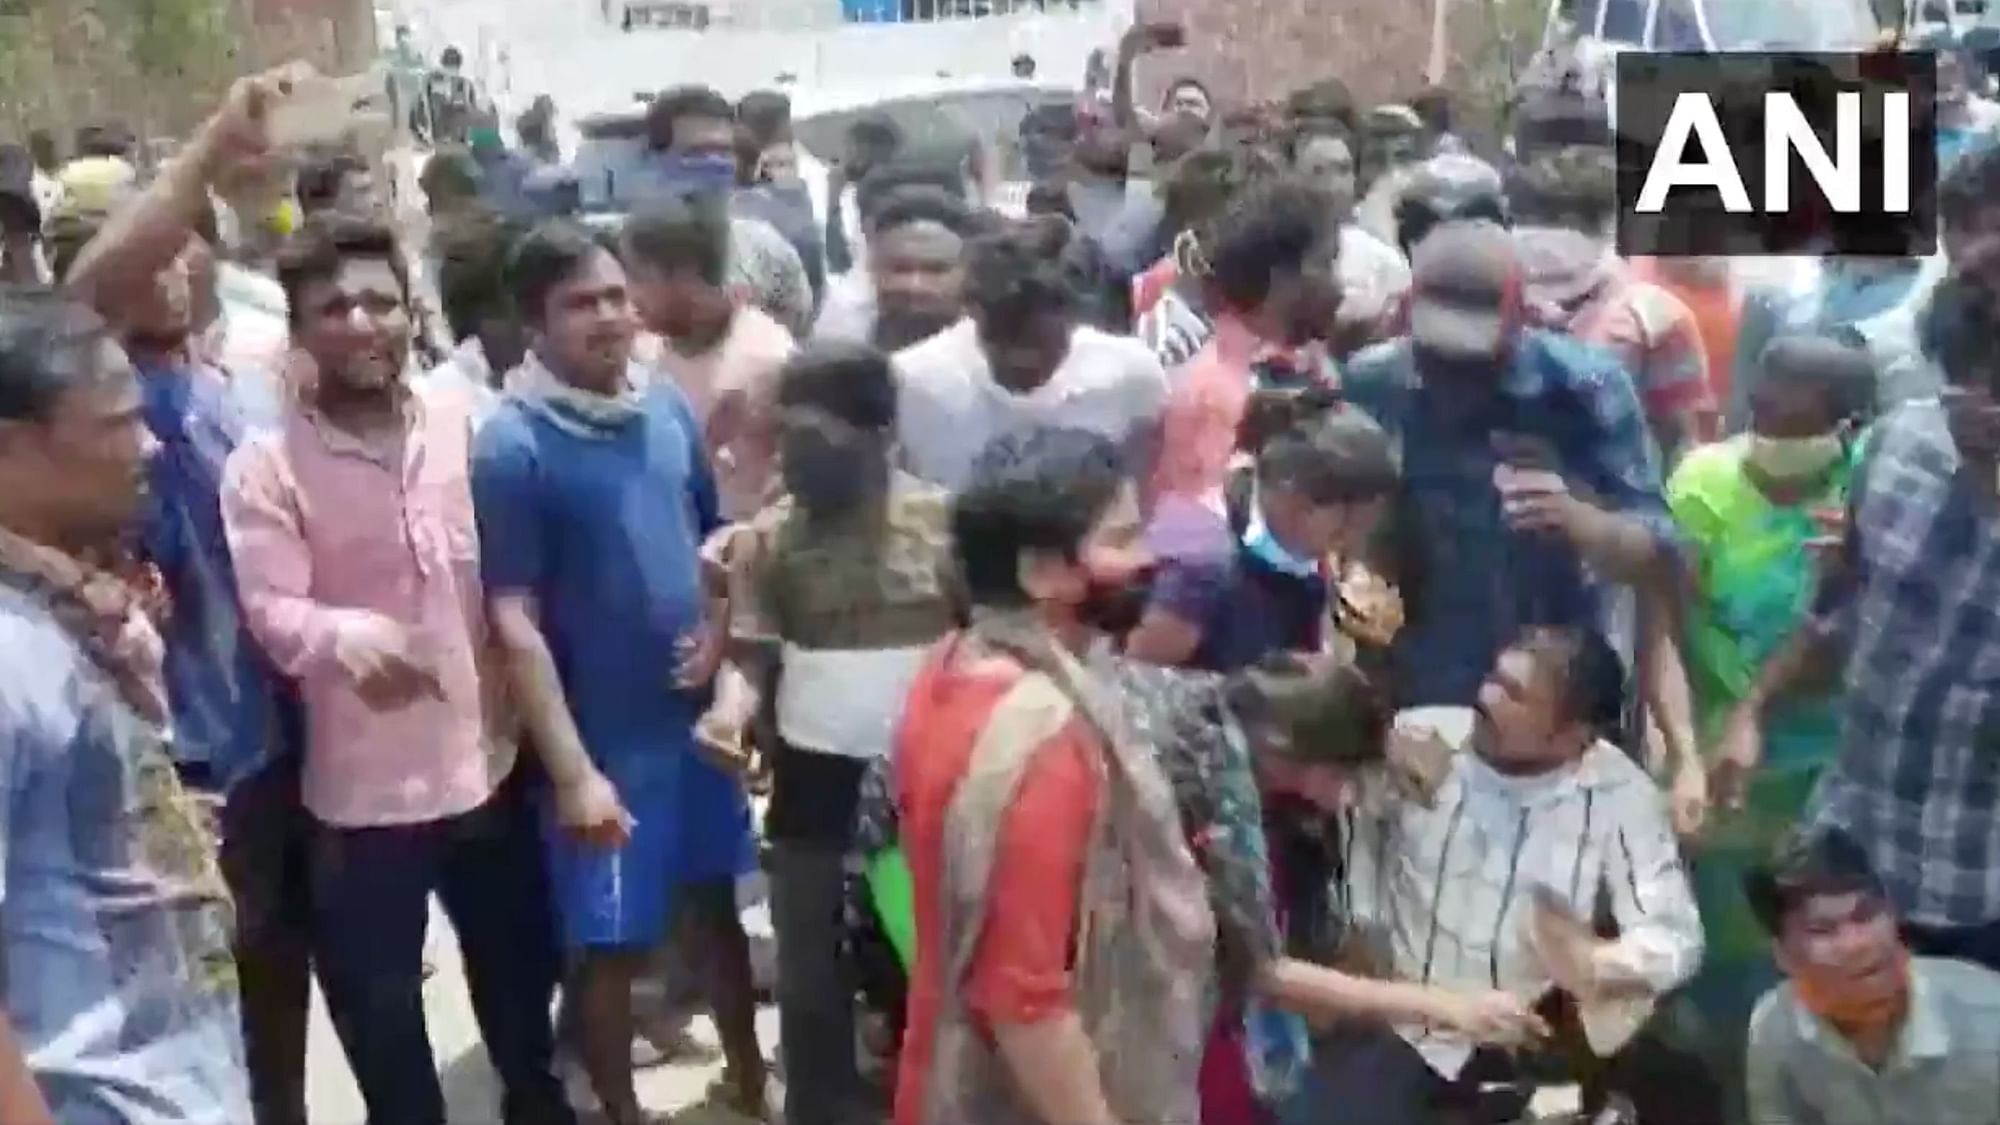 Locals of R R Venkatapuram in Visakhapatnam staged a protest demanding relocation of the plan and arrests of those responsible for the styrene leak that claimed at least 11 lives.